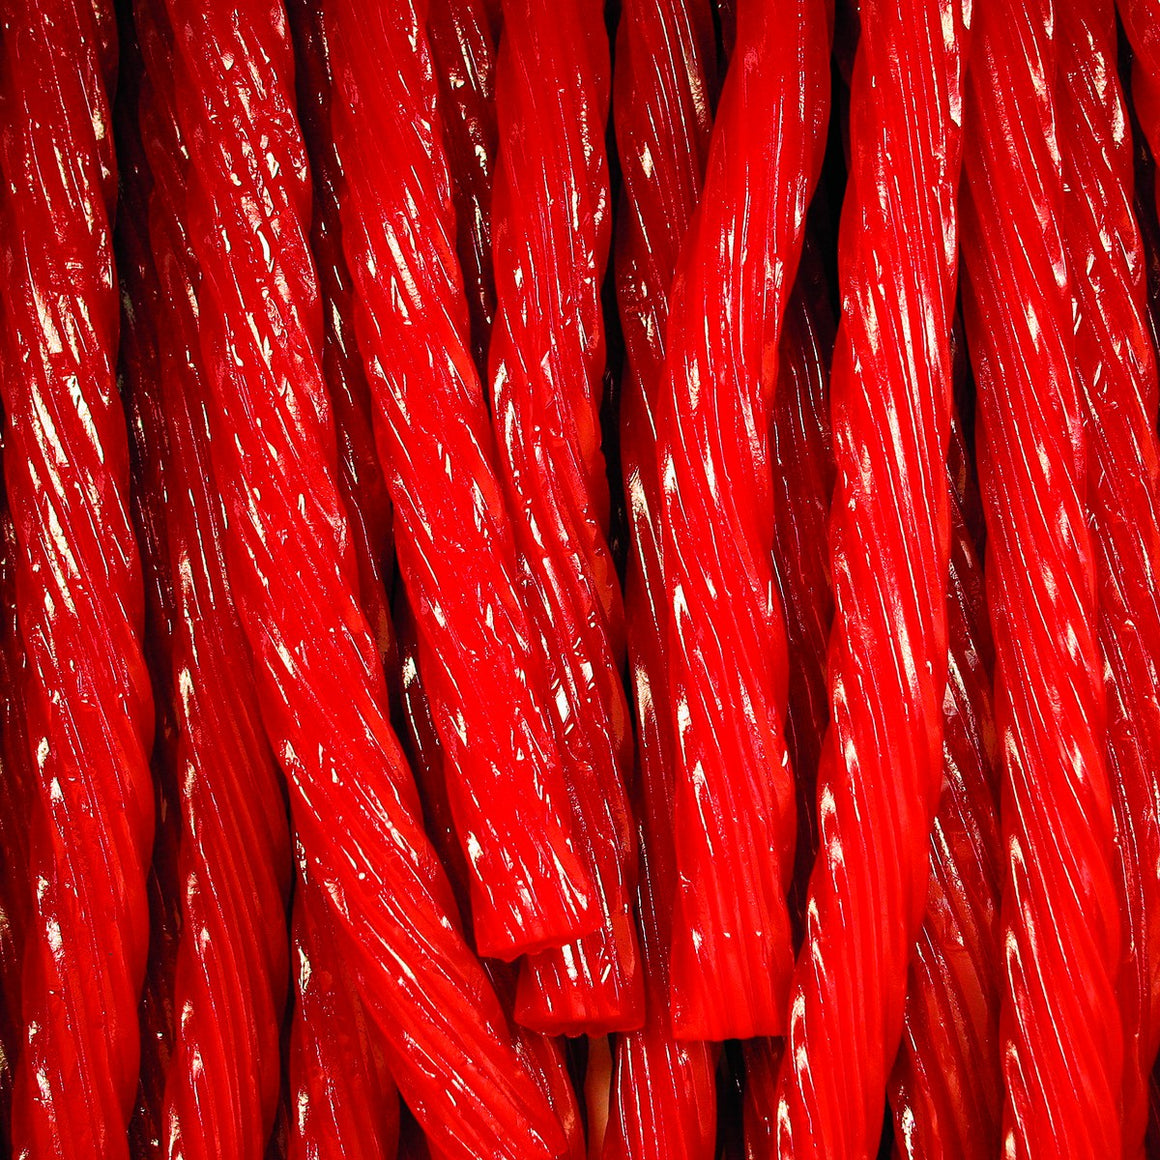 All City Candy Kenny's Jumbo Twist Strawberry 8 oz. Bag Licorice Kenny's Candy Company For fresh candy and great service, visit www.allcitycandy.com